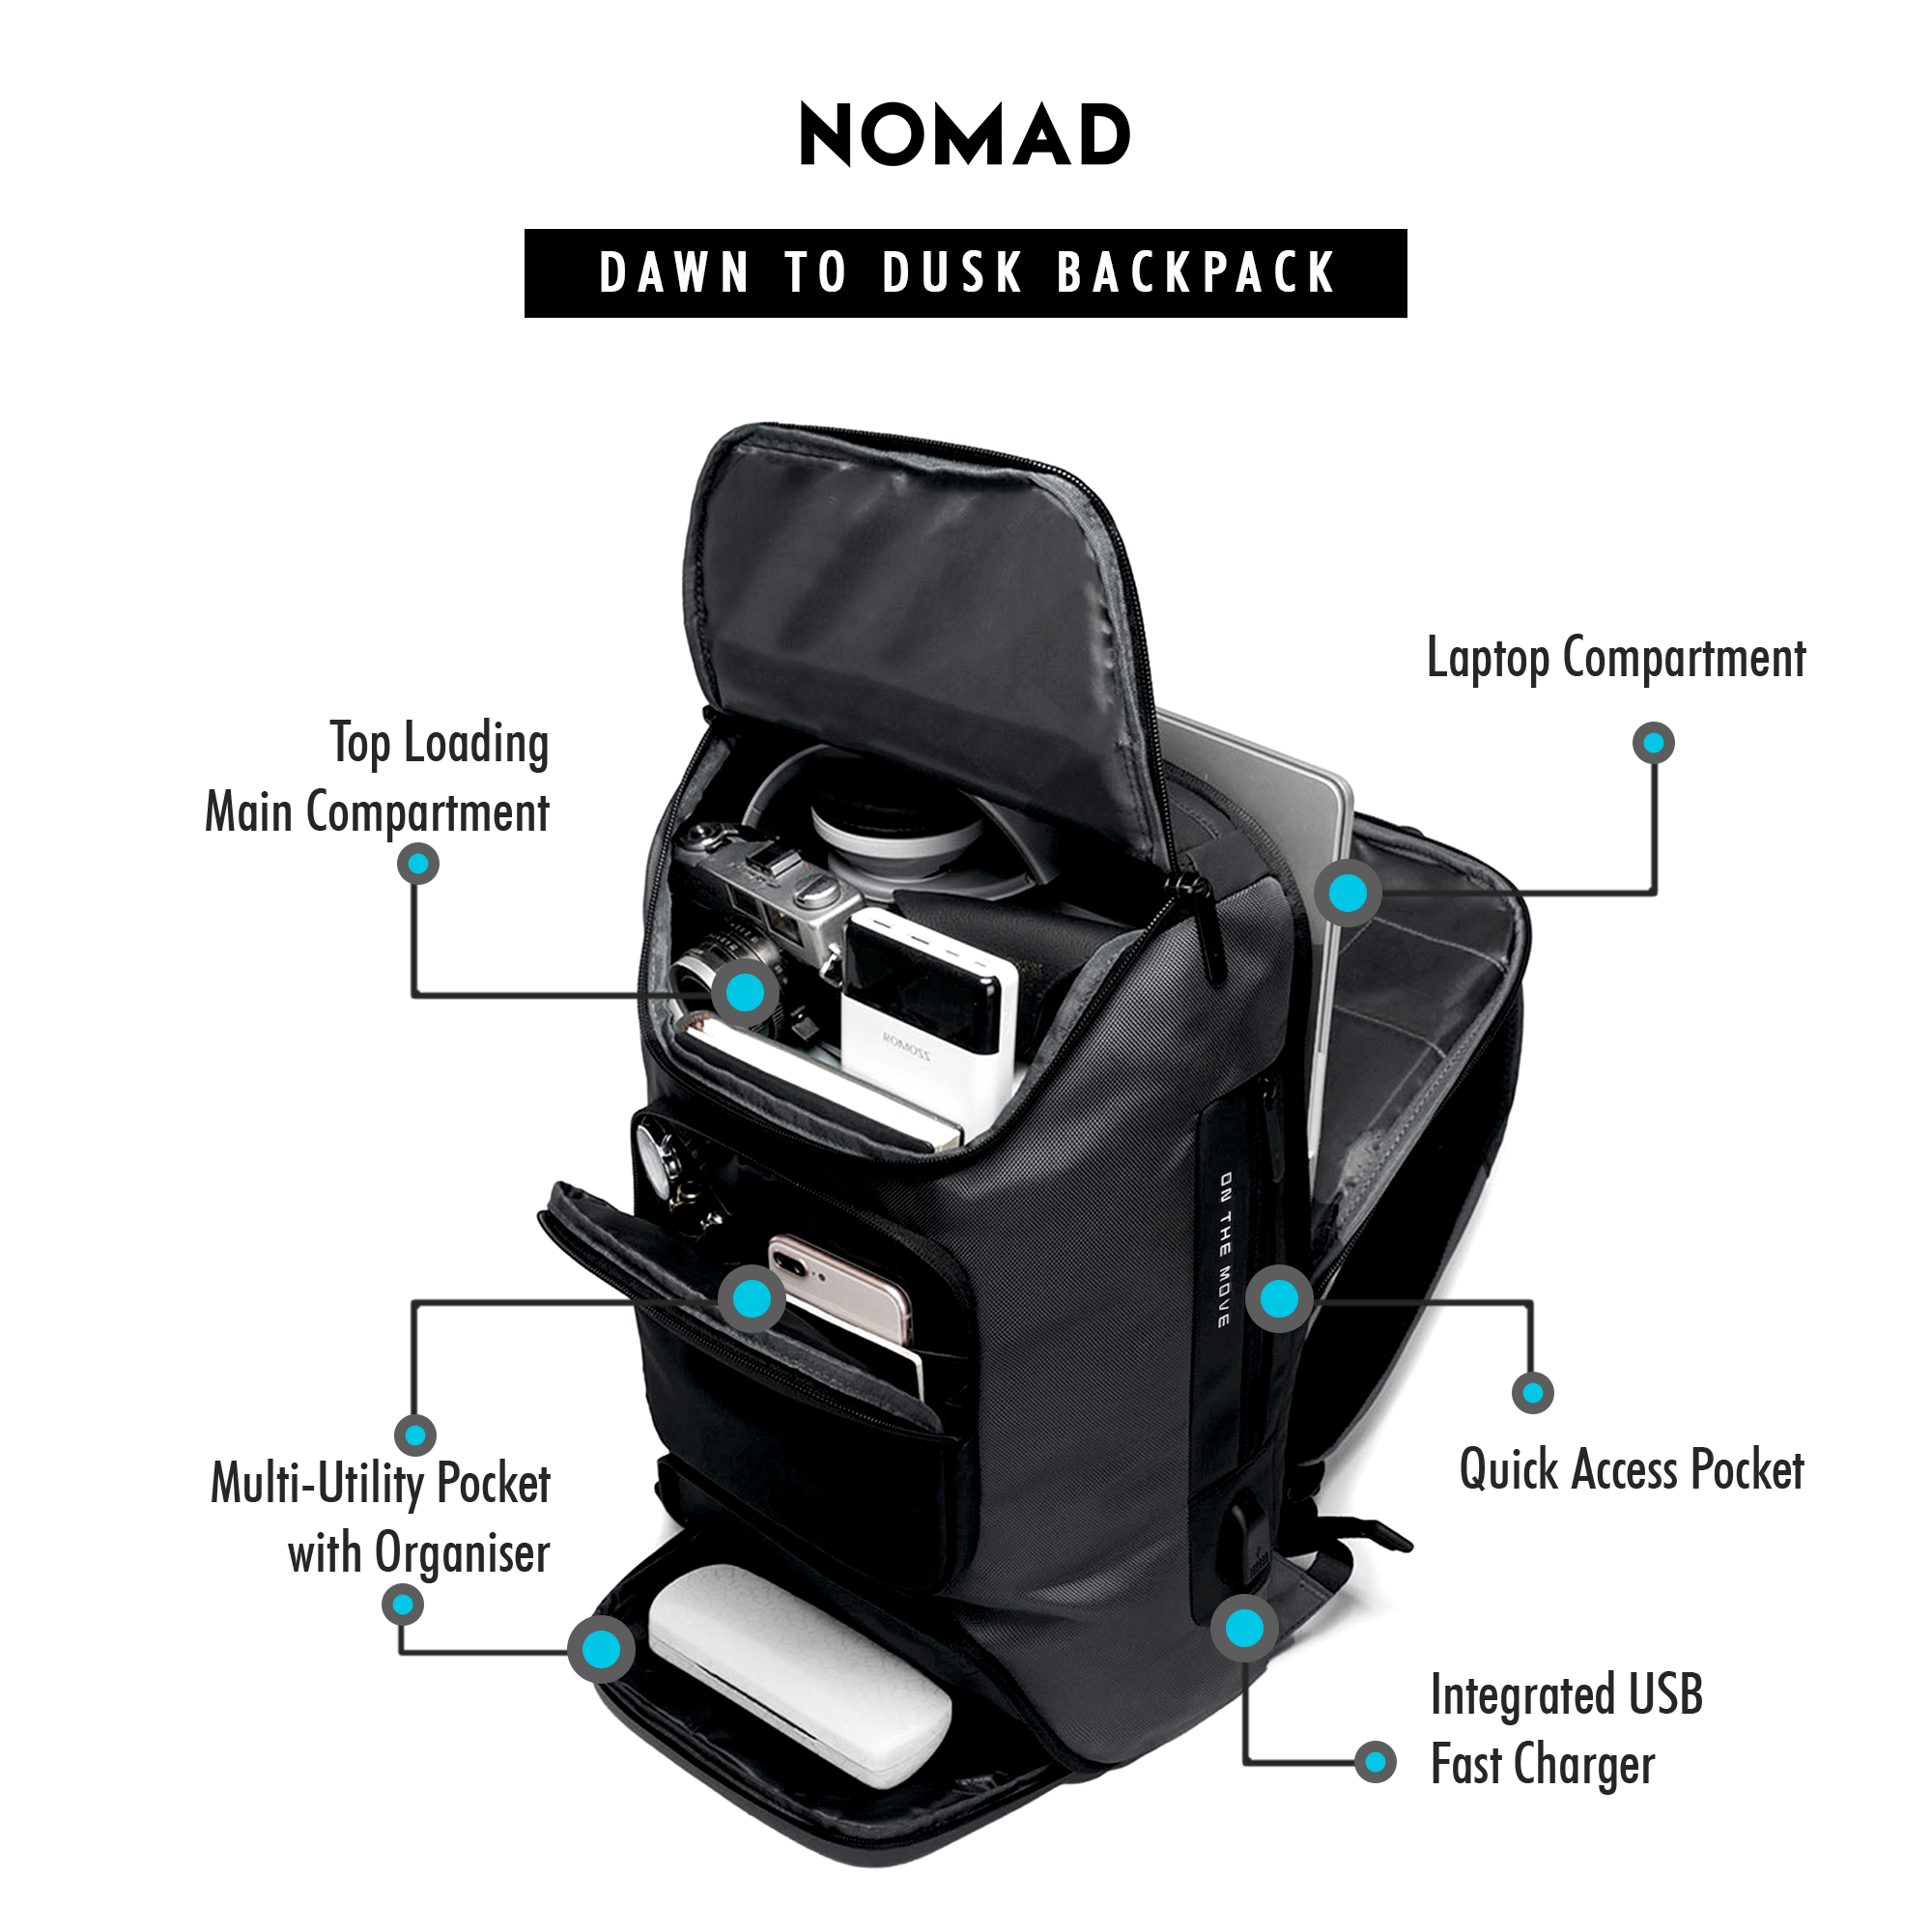 Nomad Laptop Backpack (Obsidian Black) with USB Fast-Charging